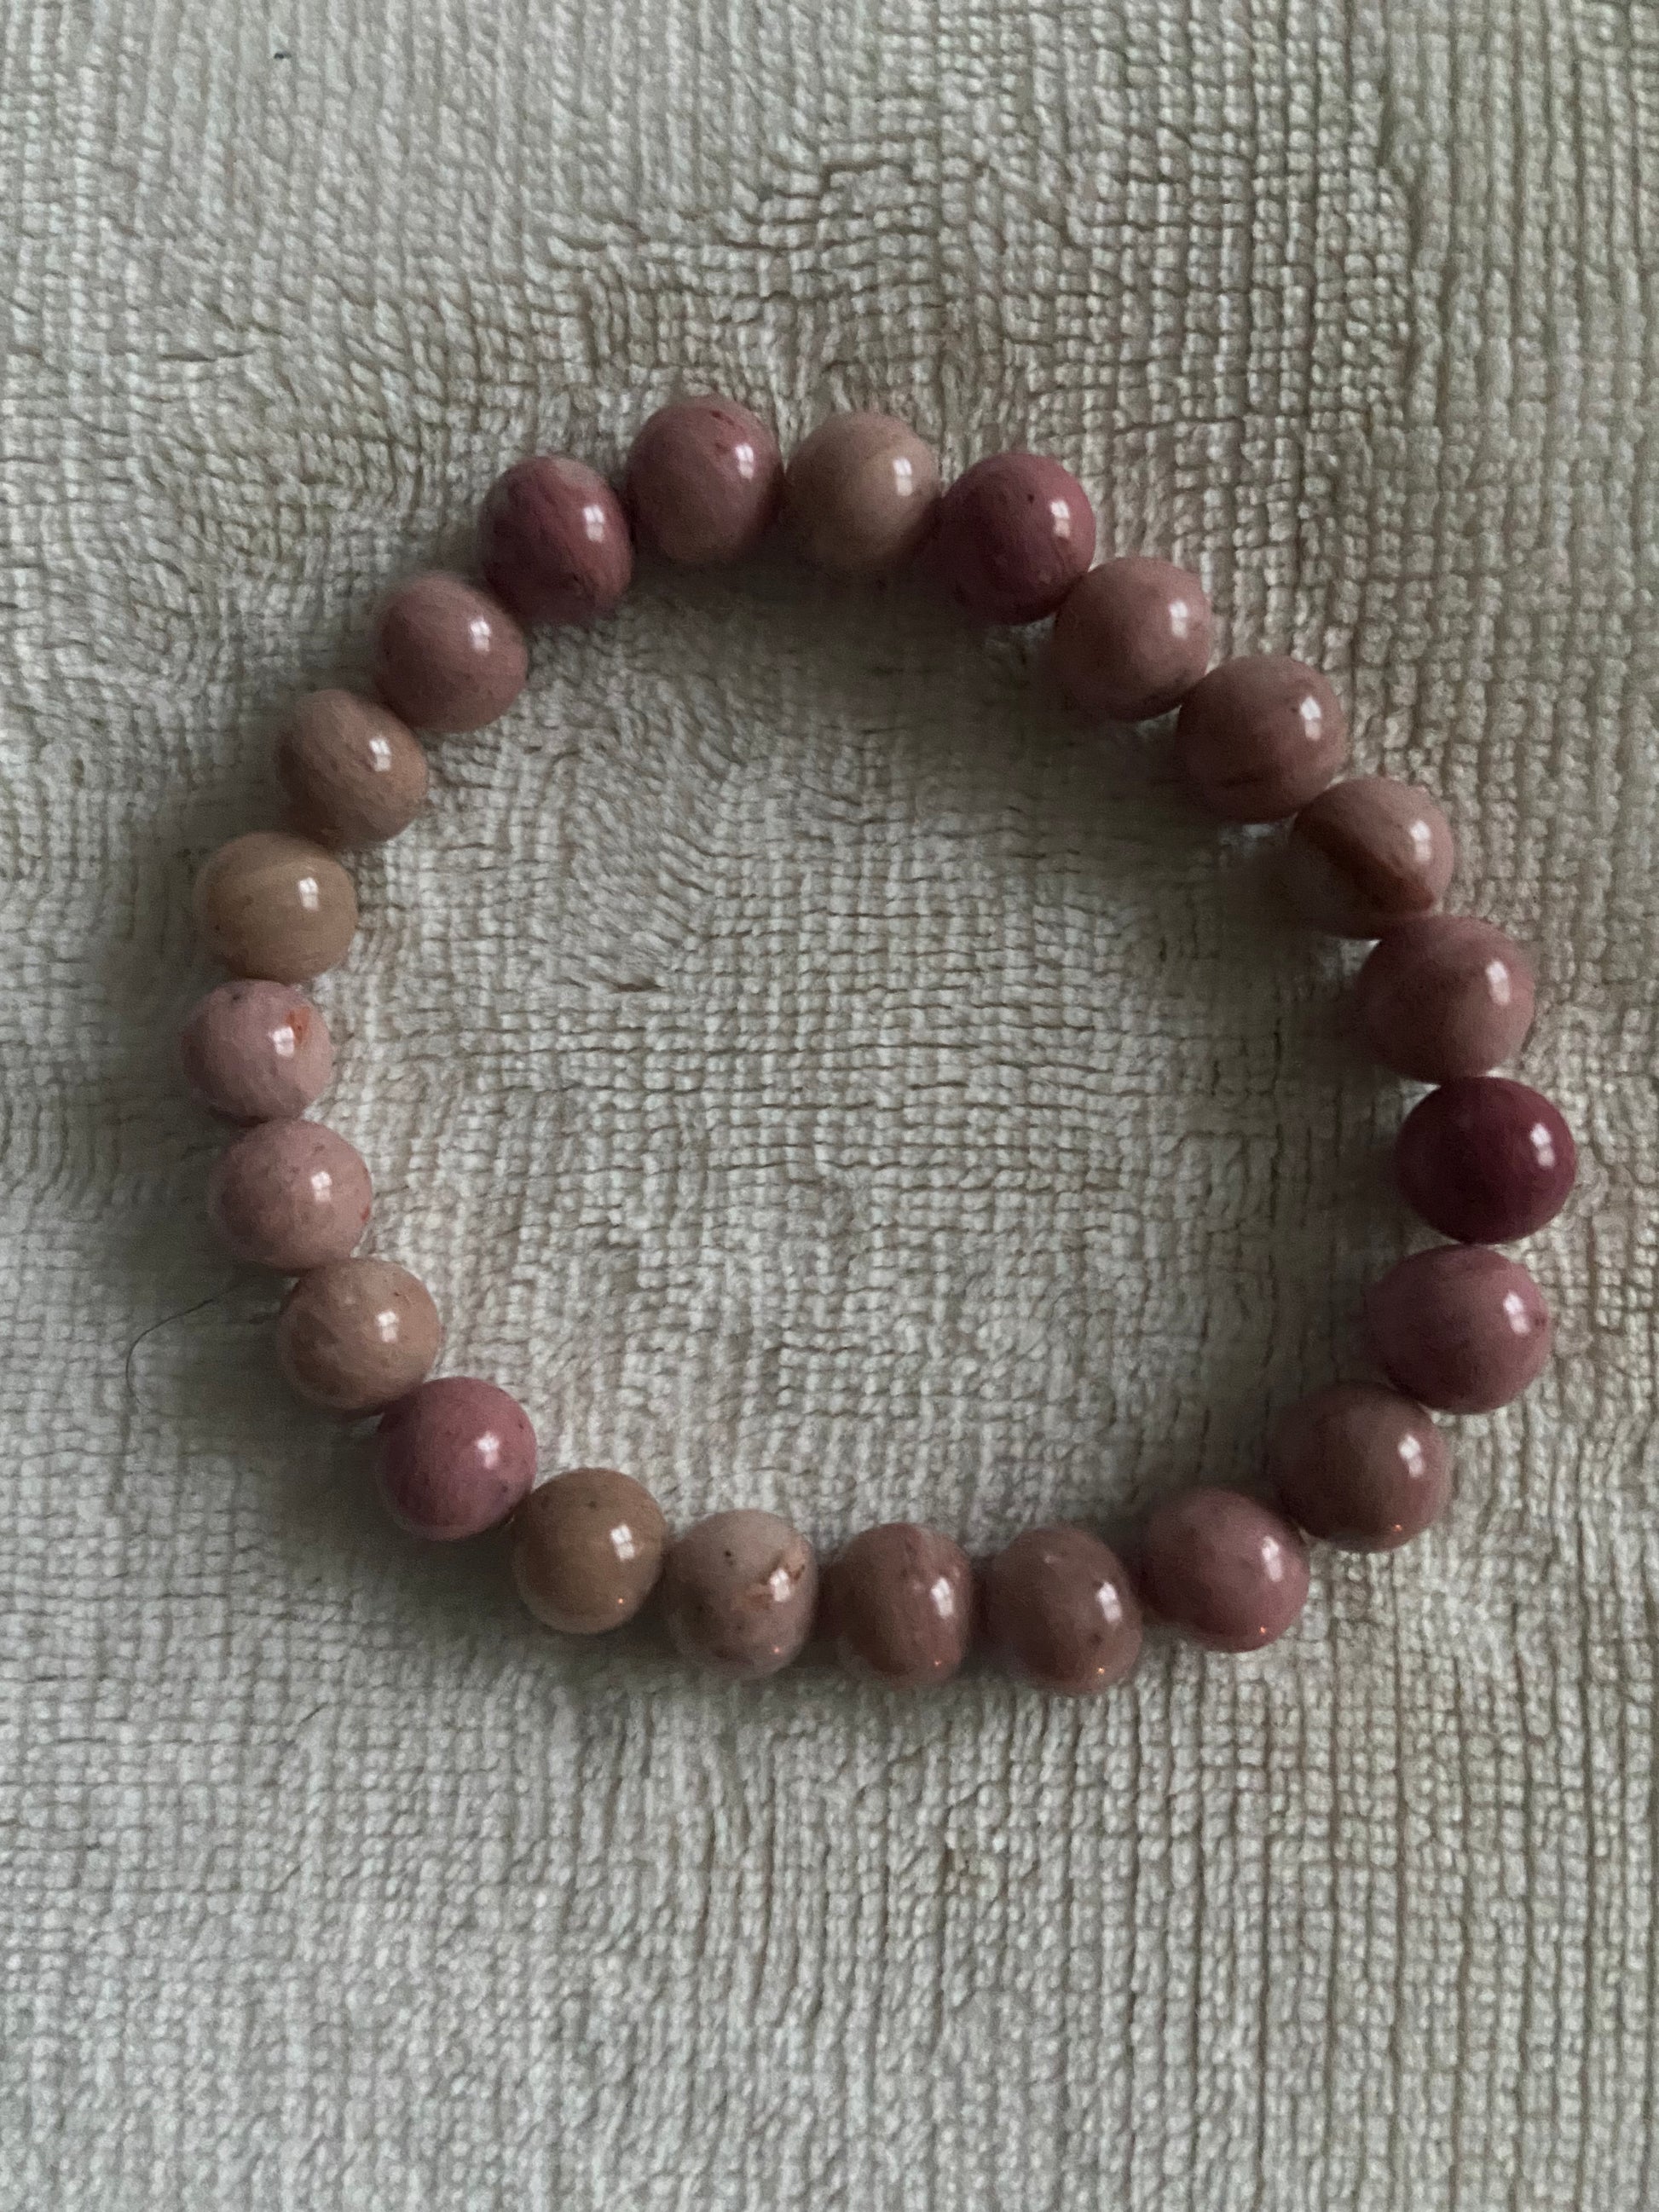  Rhodochrosite Bracelet - Bracelet available at Amazing Creations Products . Grab yours for $10.00 today!